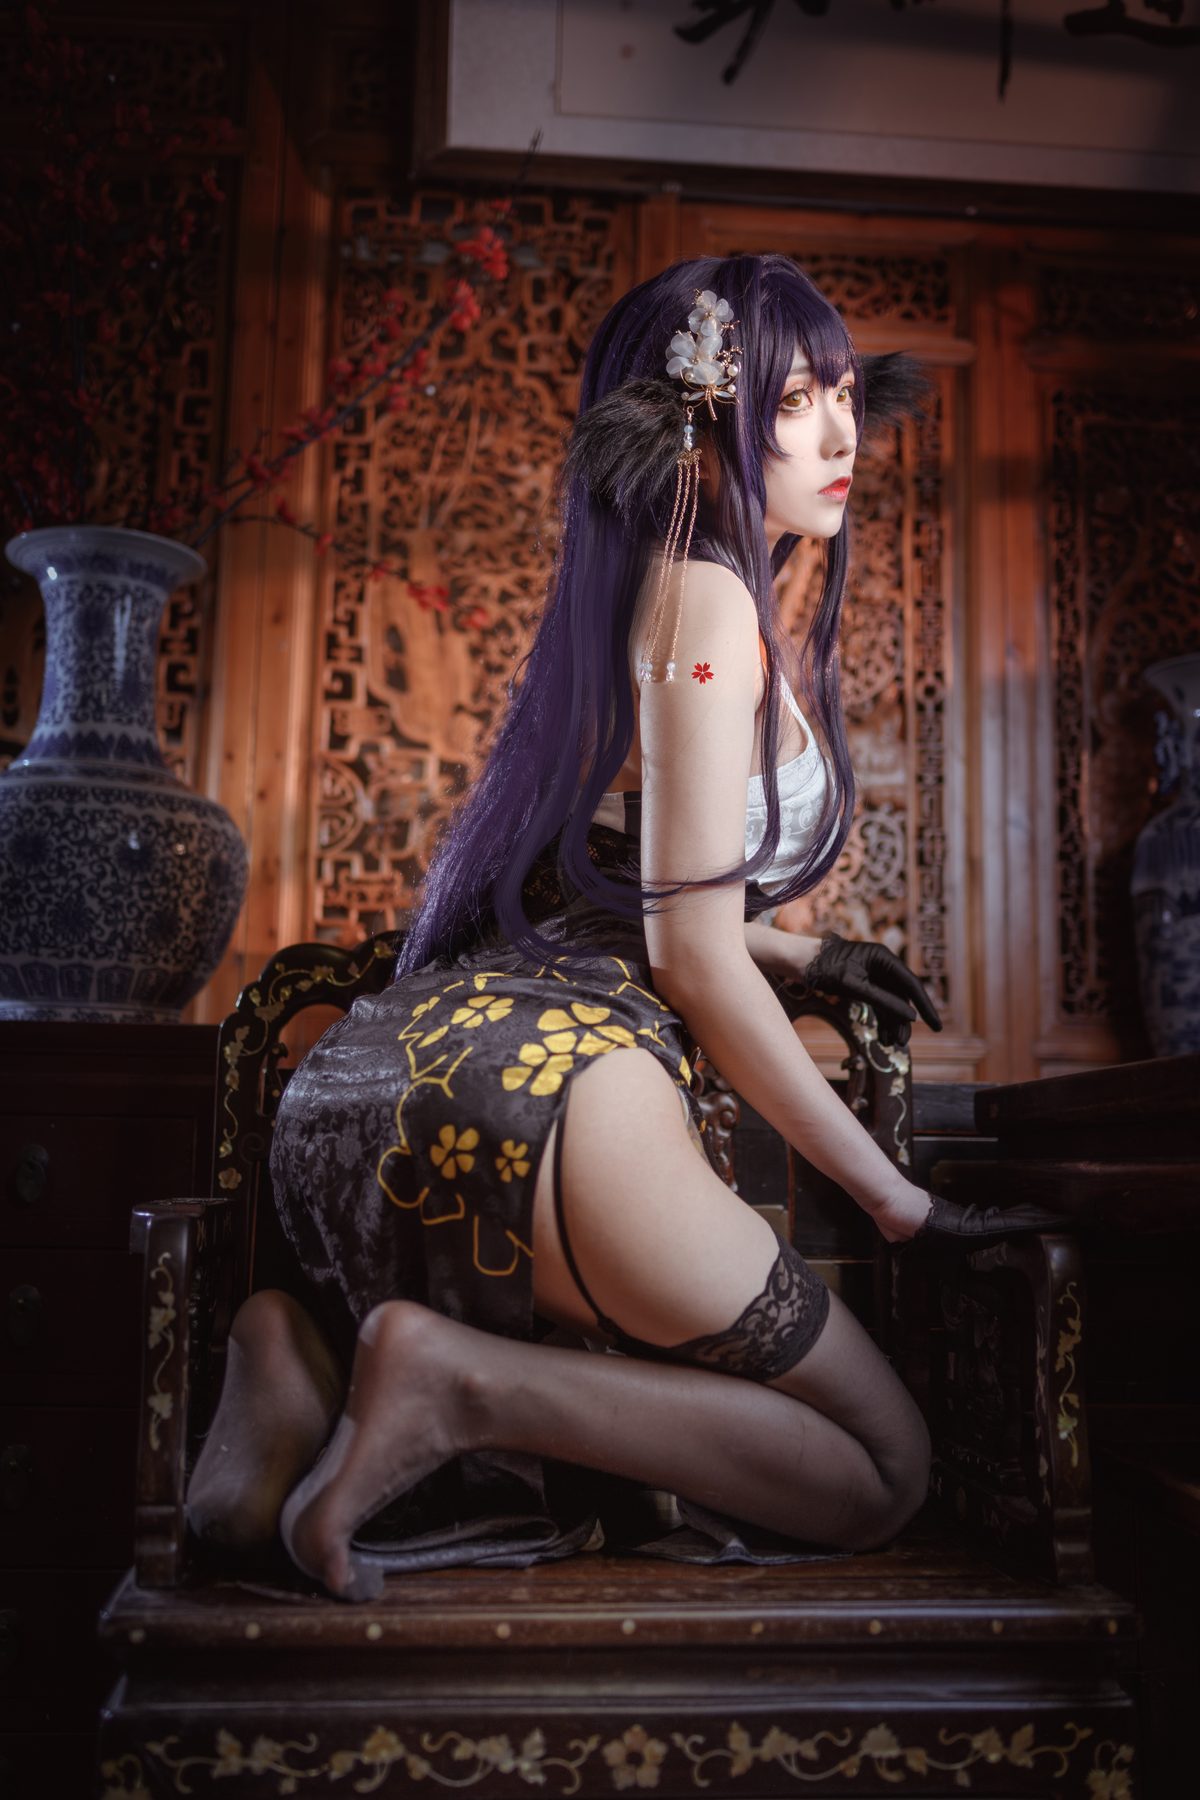 View - Coser@翎柒菜菜 No.013 吾妻 - 